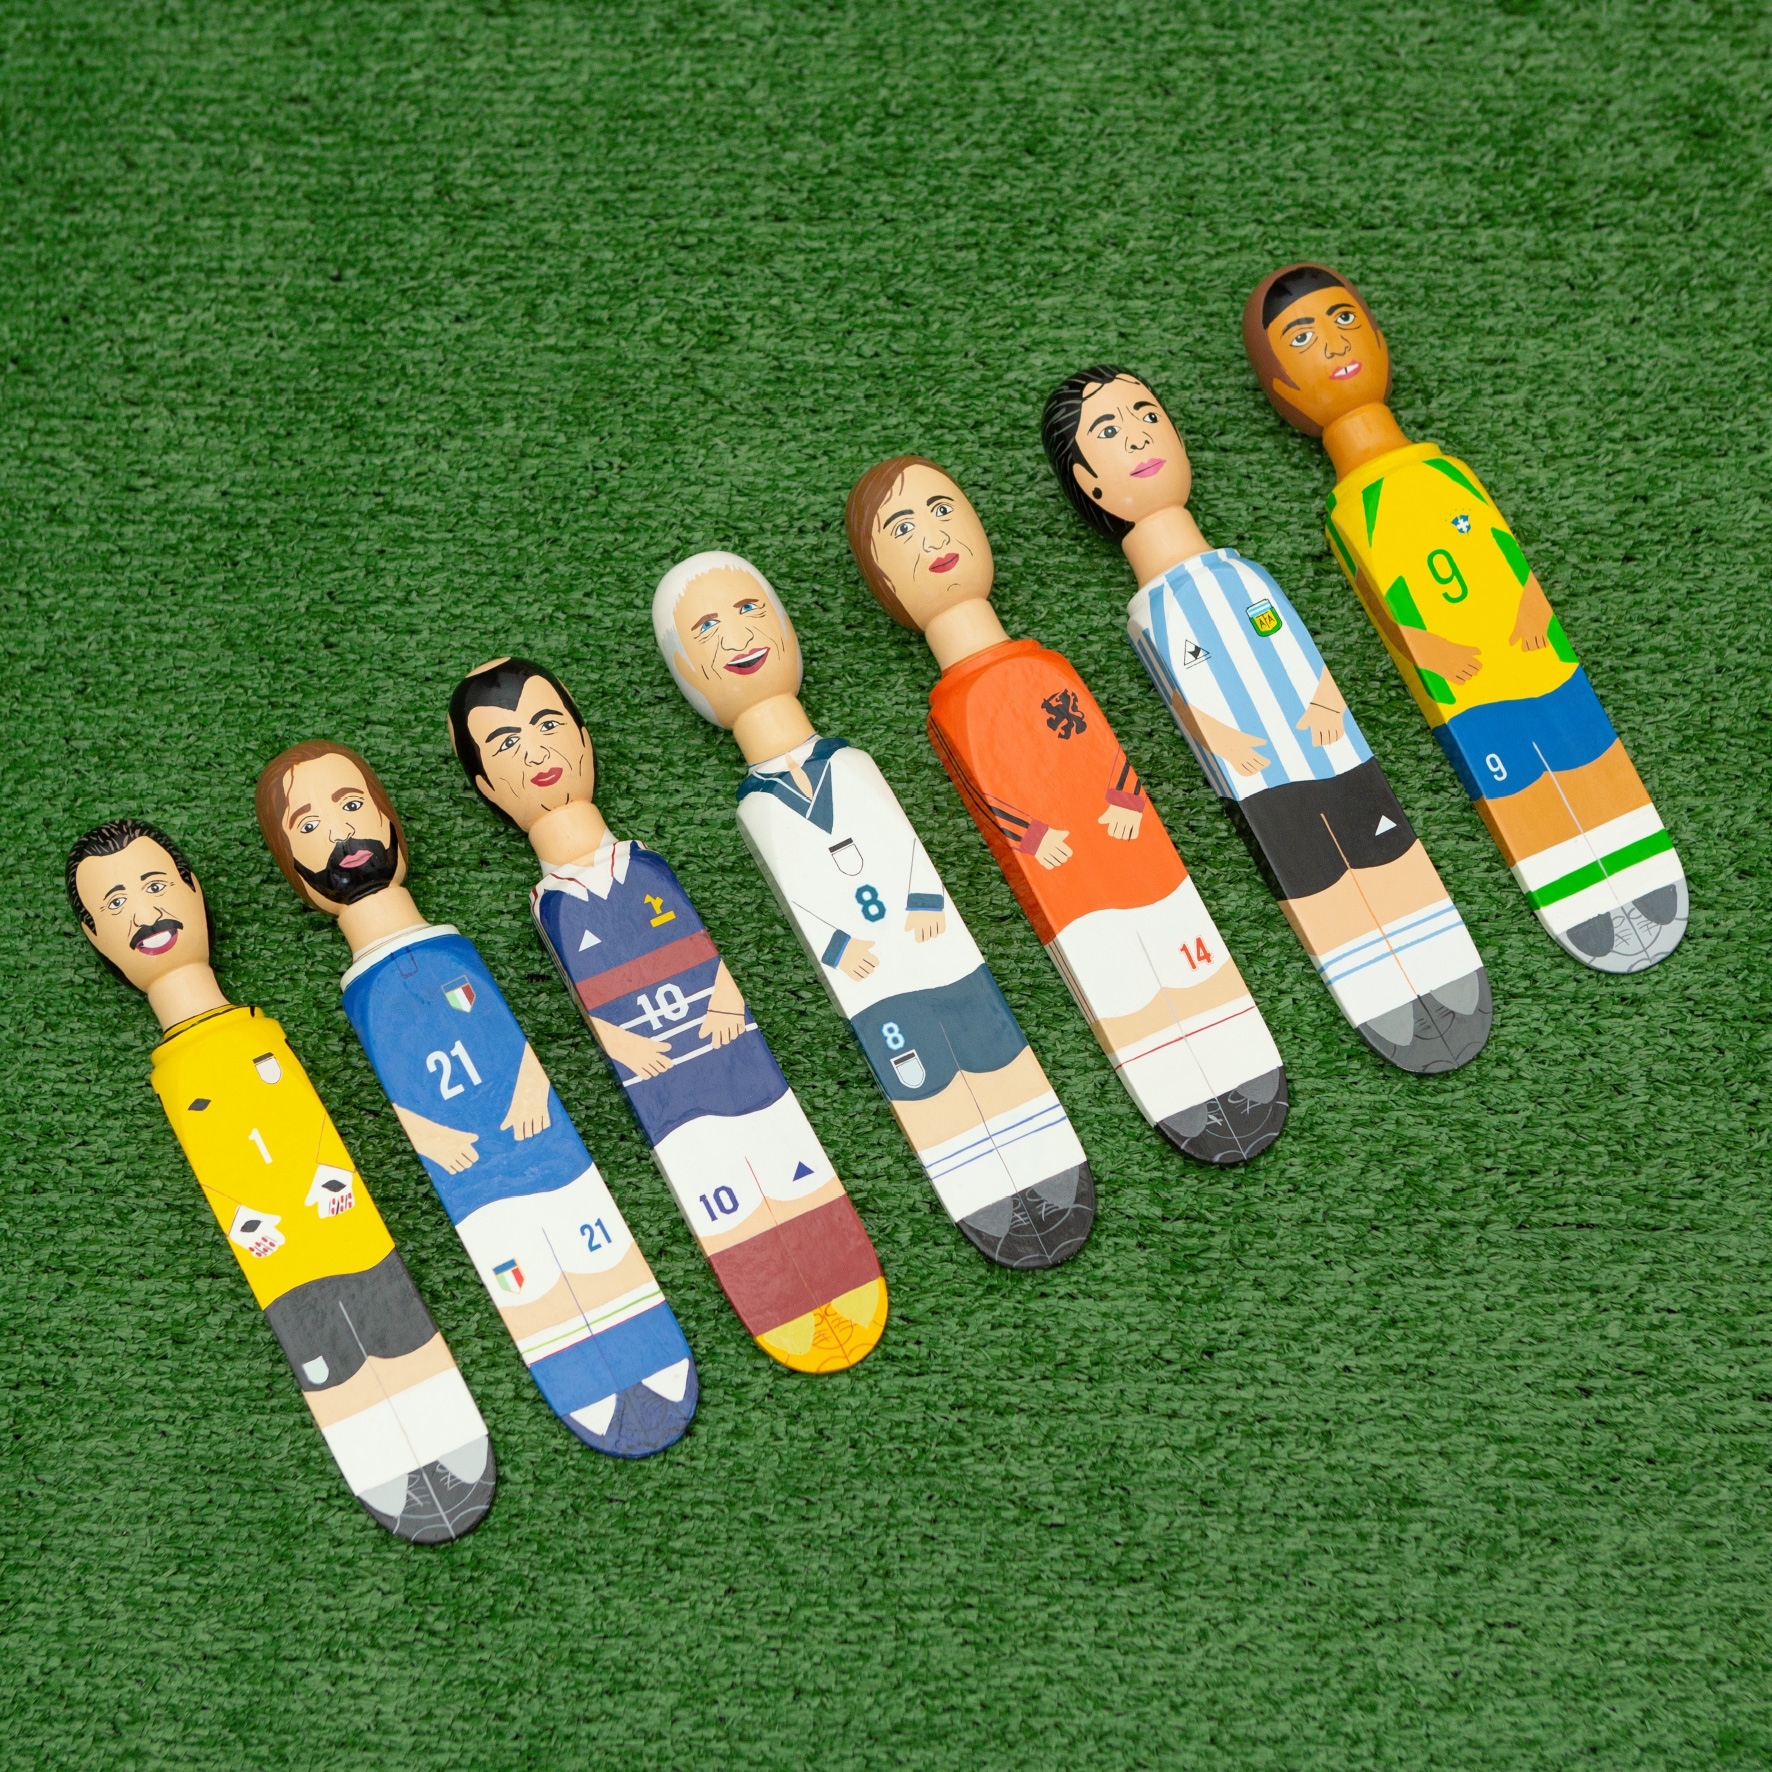 WEDGIE X MUNDIAL

WORLD CUP SPECIALS - LIMITED EDITION COLLECTION